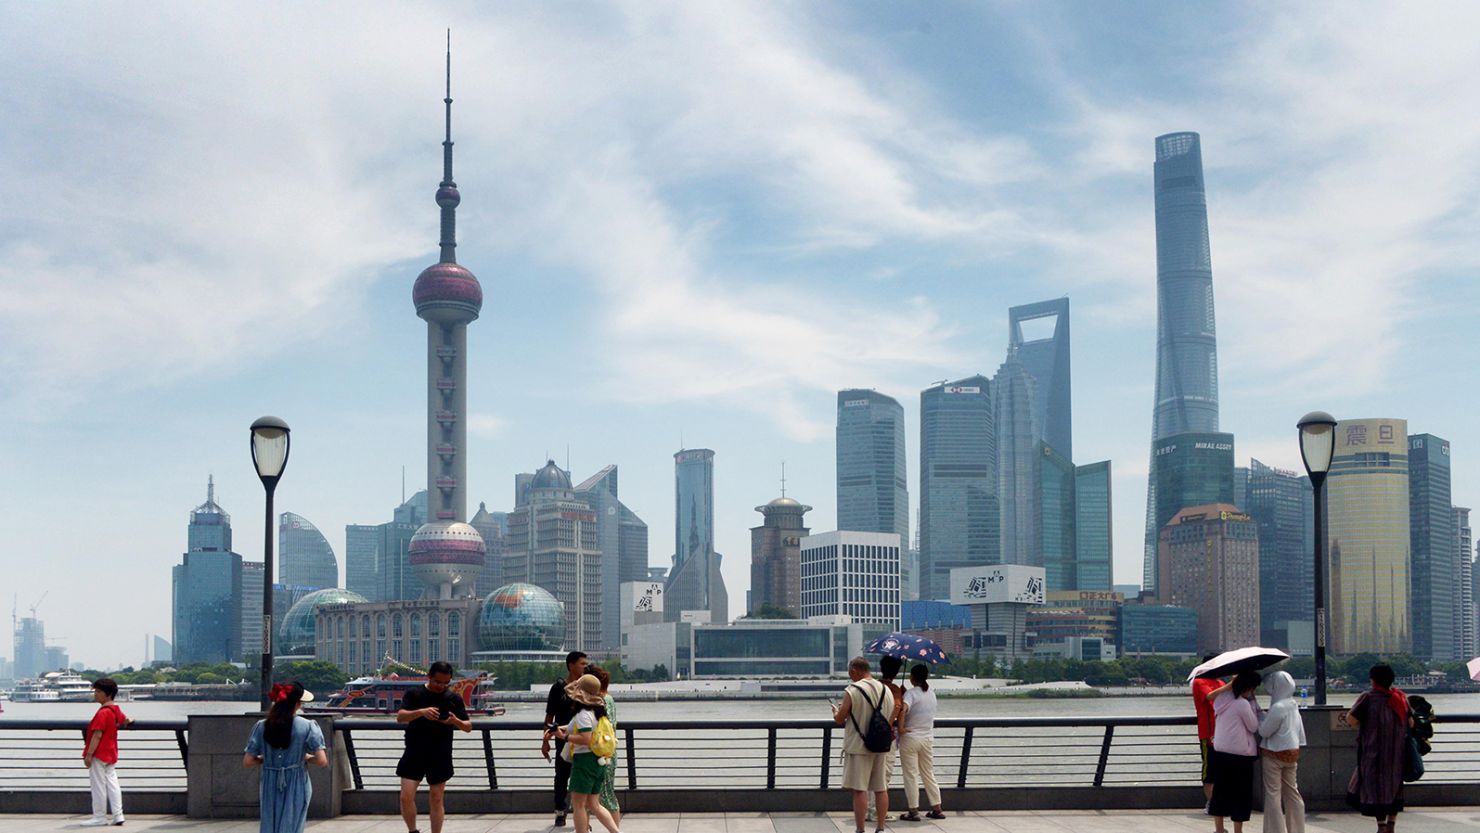 Tourists look out onto the Lujiazui financial district in Shanghai, which is part of the city's pilot free trade zone and home to hundreds of banks and financial service firms.